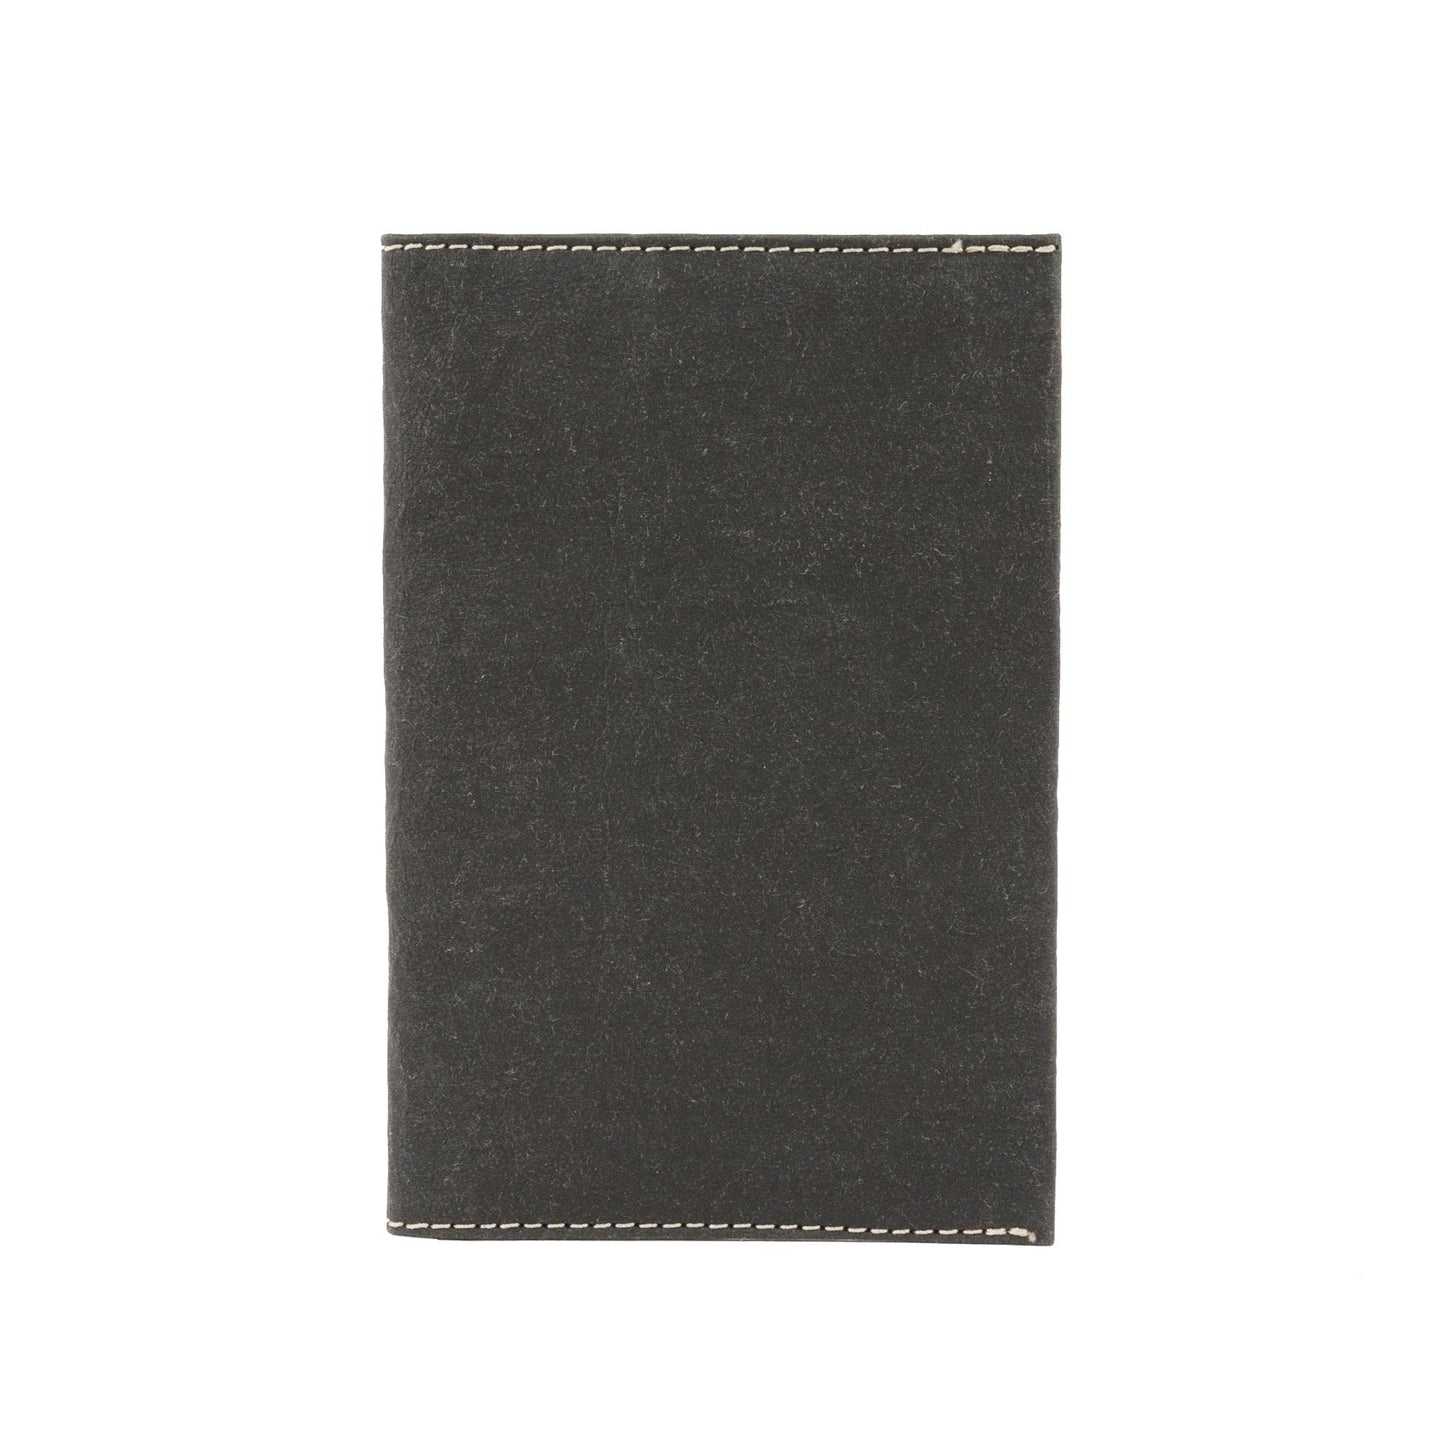 A large washable paper wallet is shown folded closed. The wallet is black.